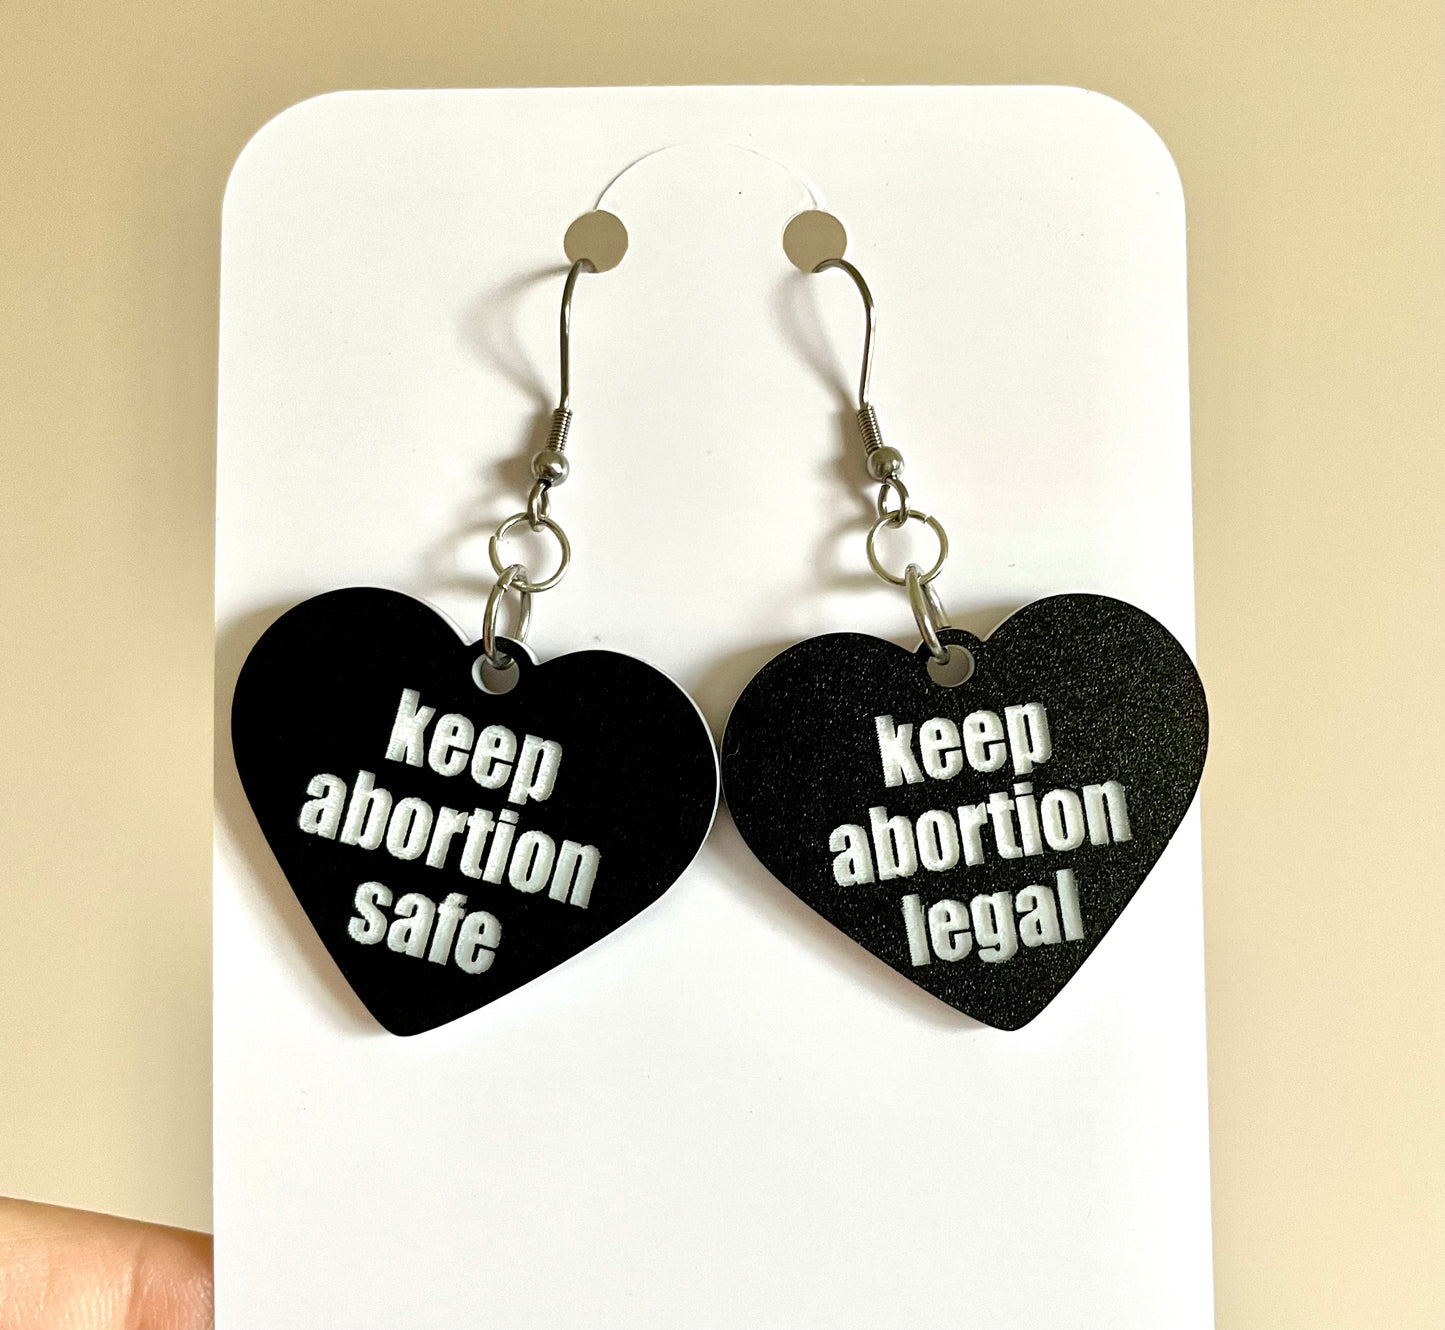 Keep abortion safe/legal earrings